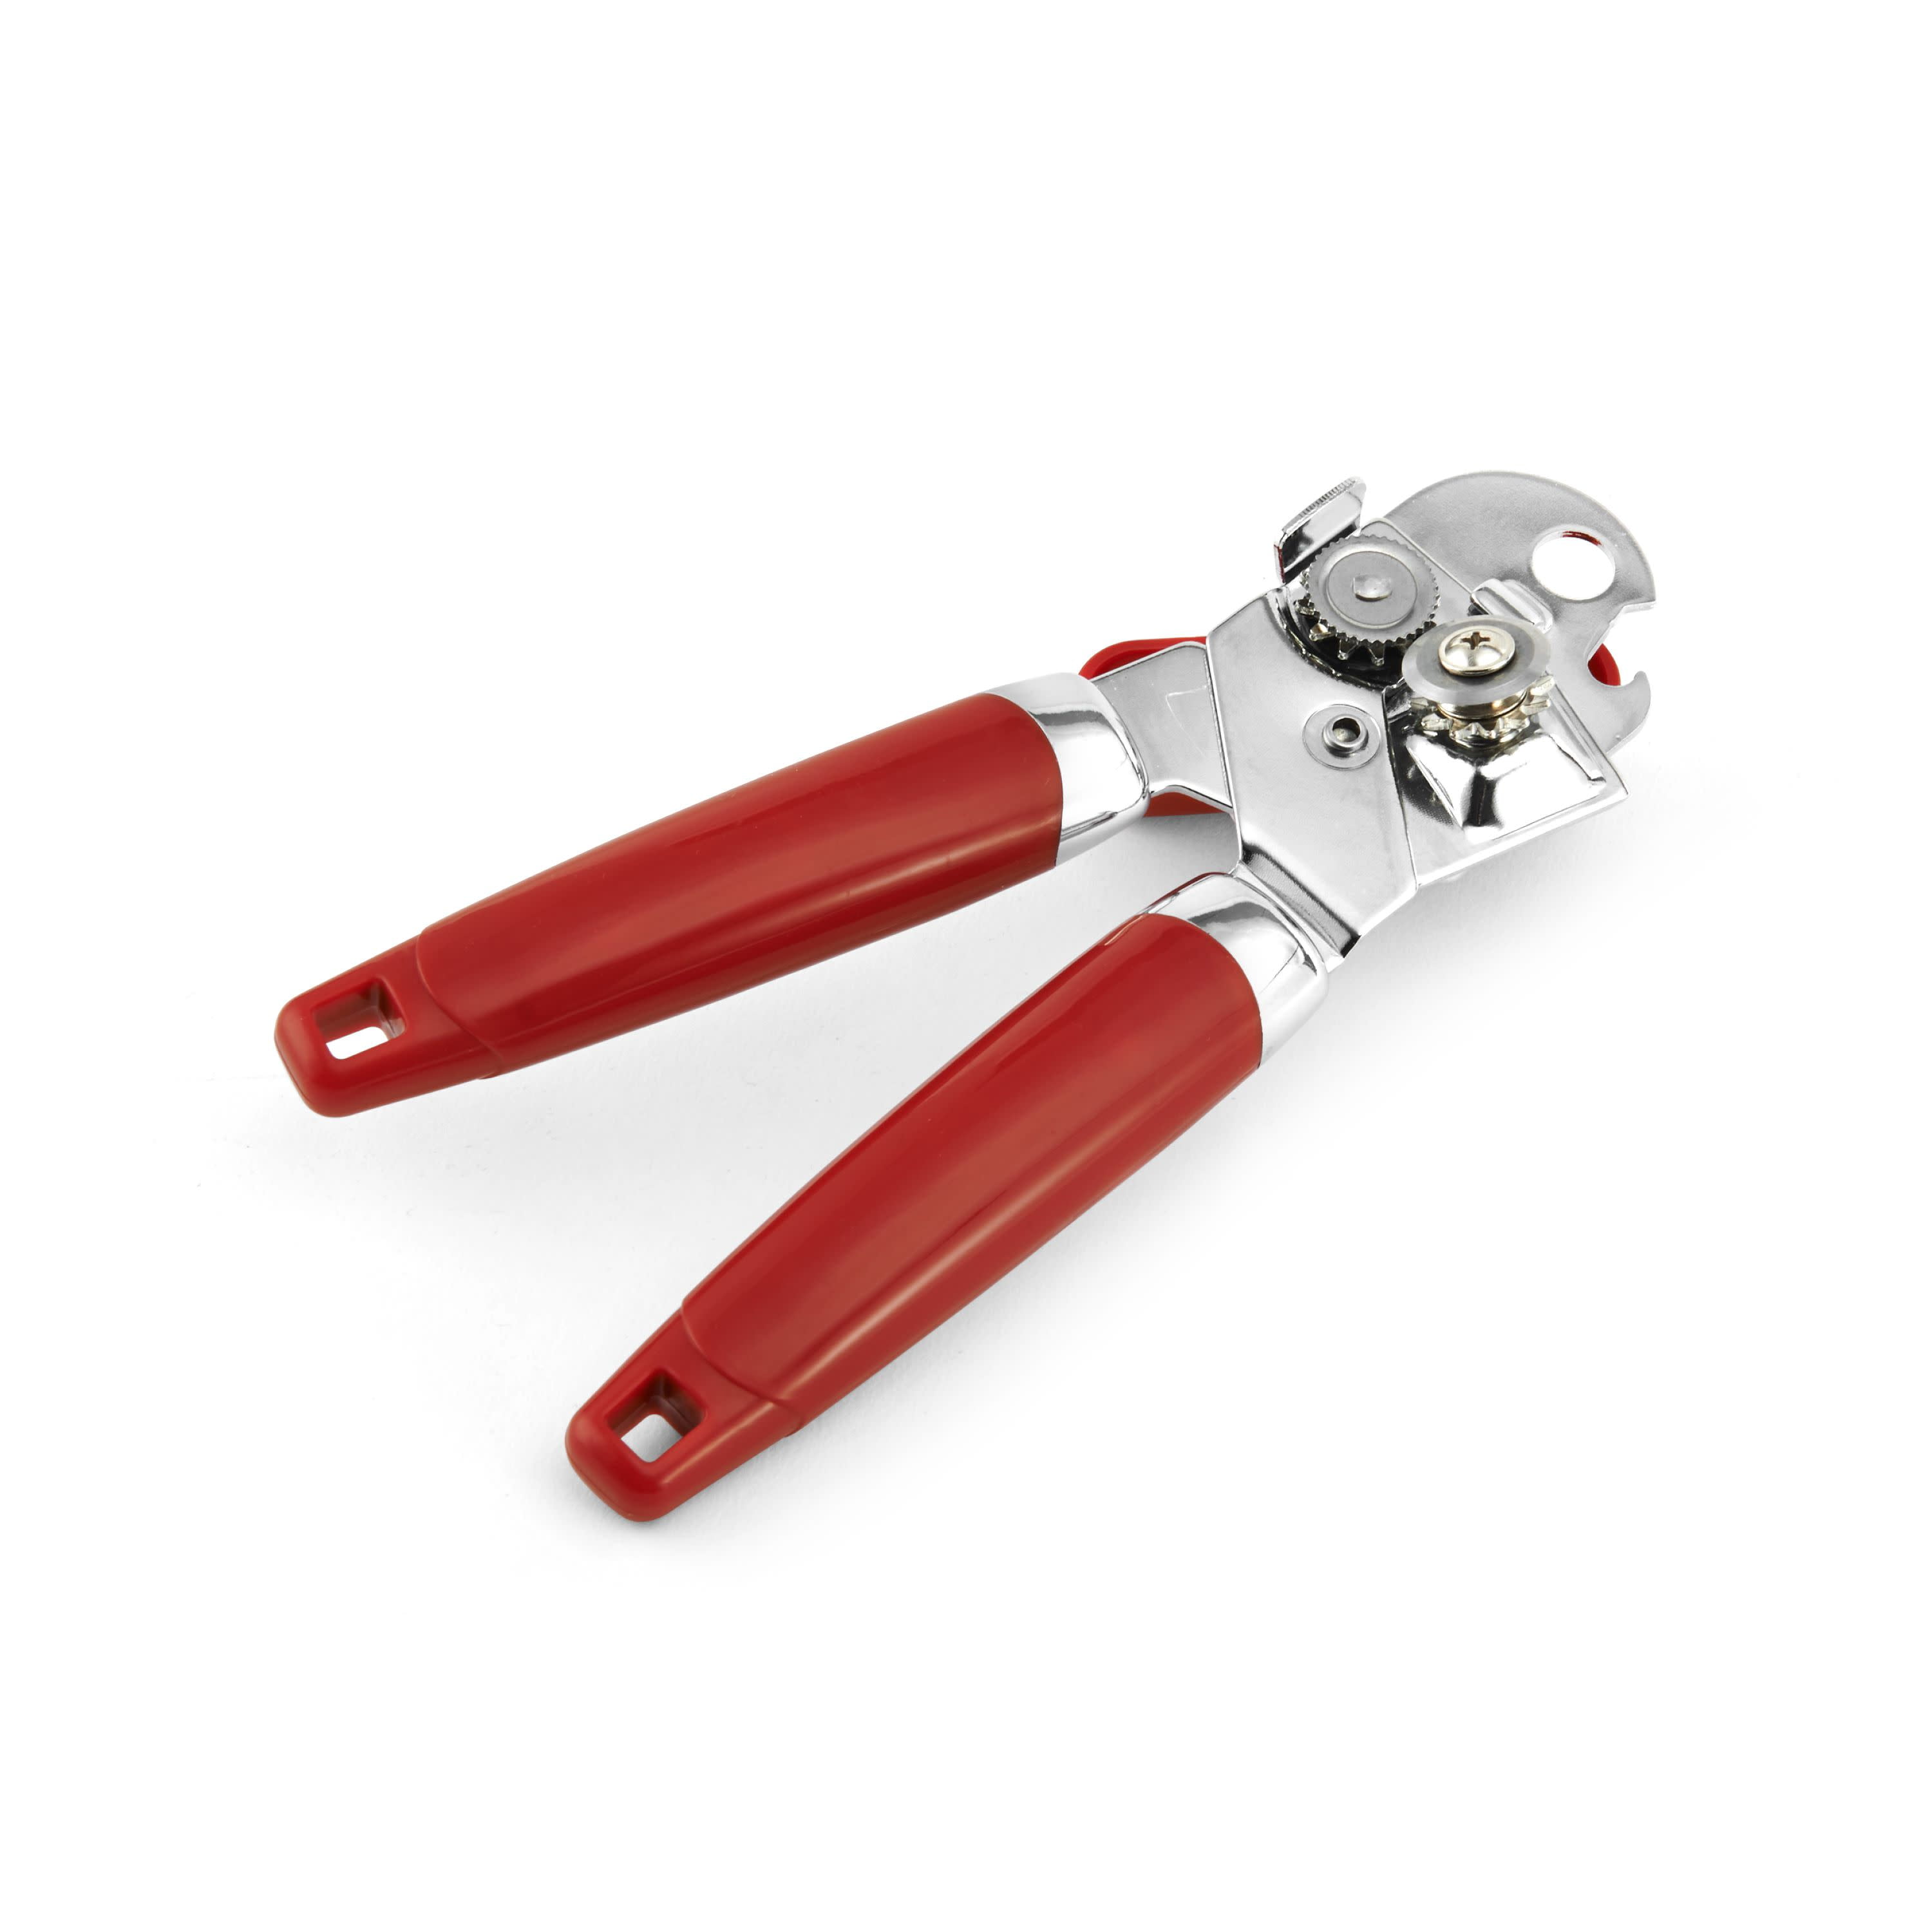  Farberware Pro 2 Can Opener, Red, One Size: Home & Kitchen